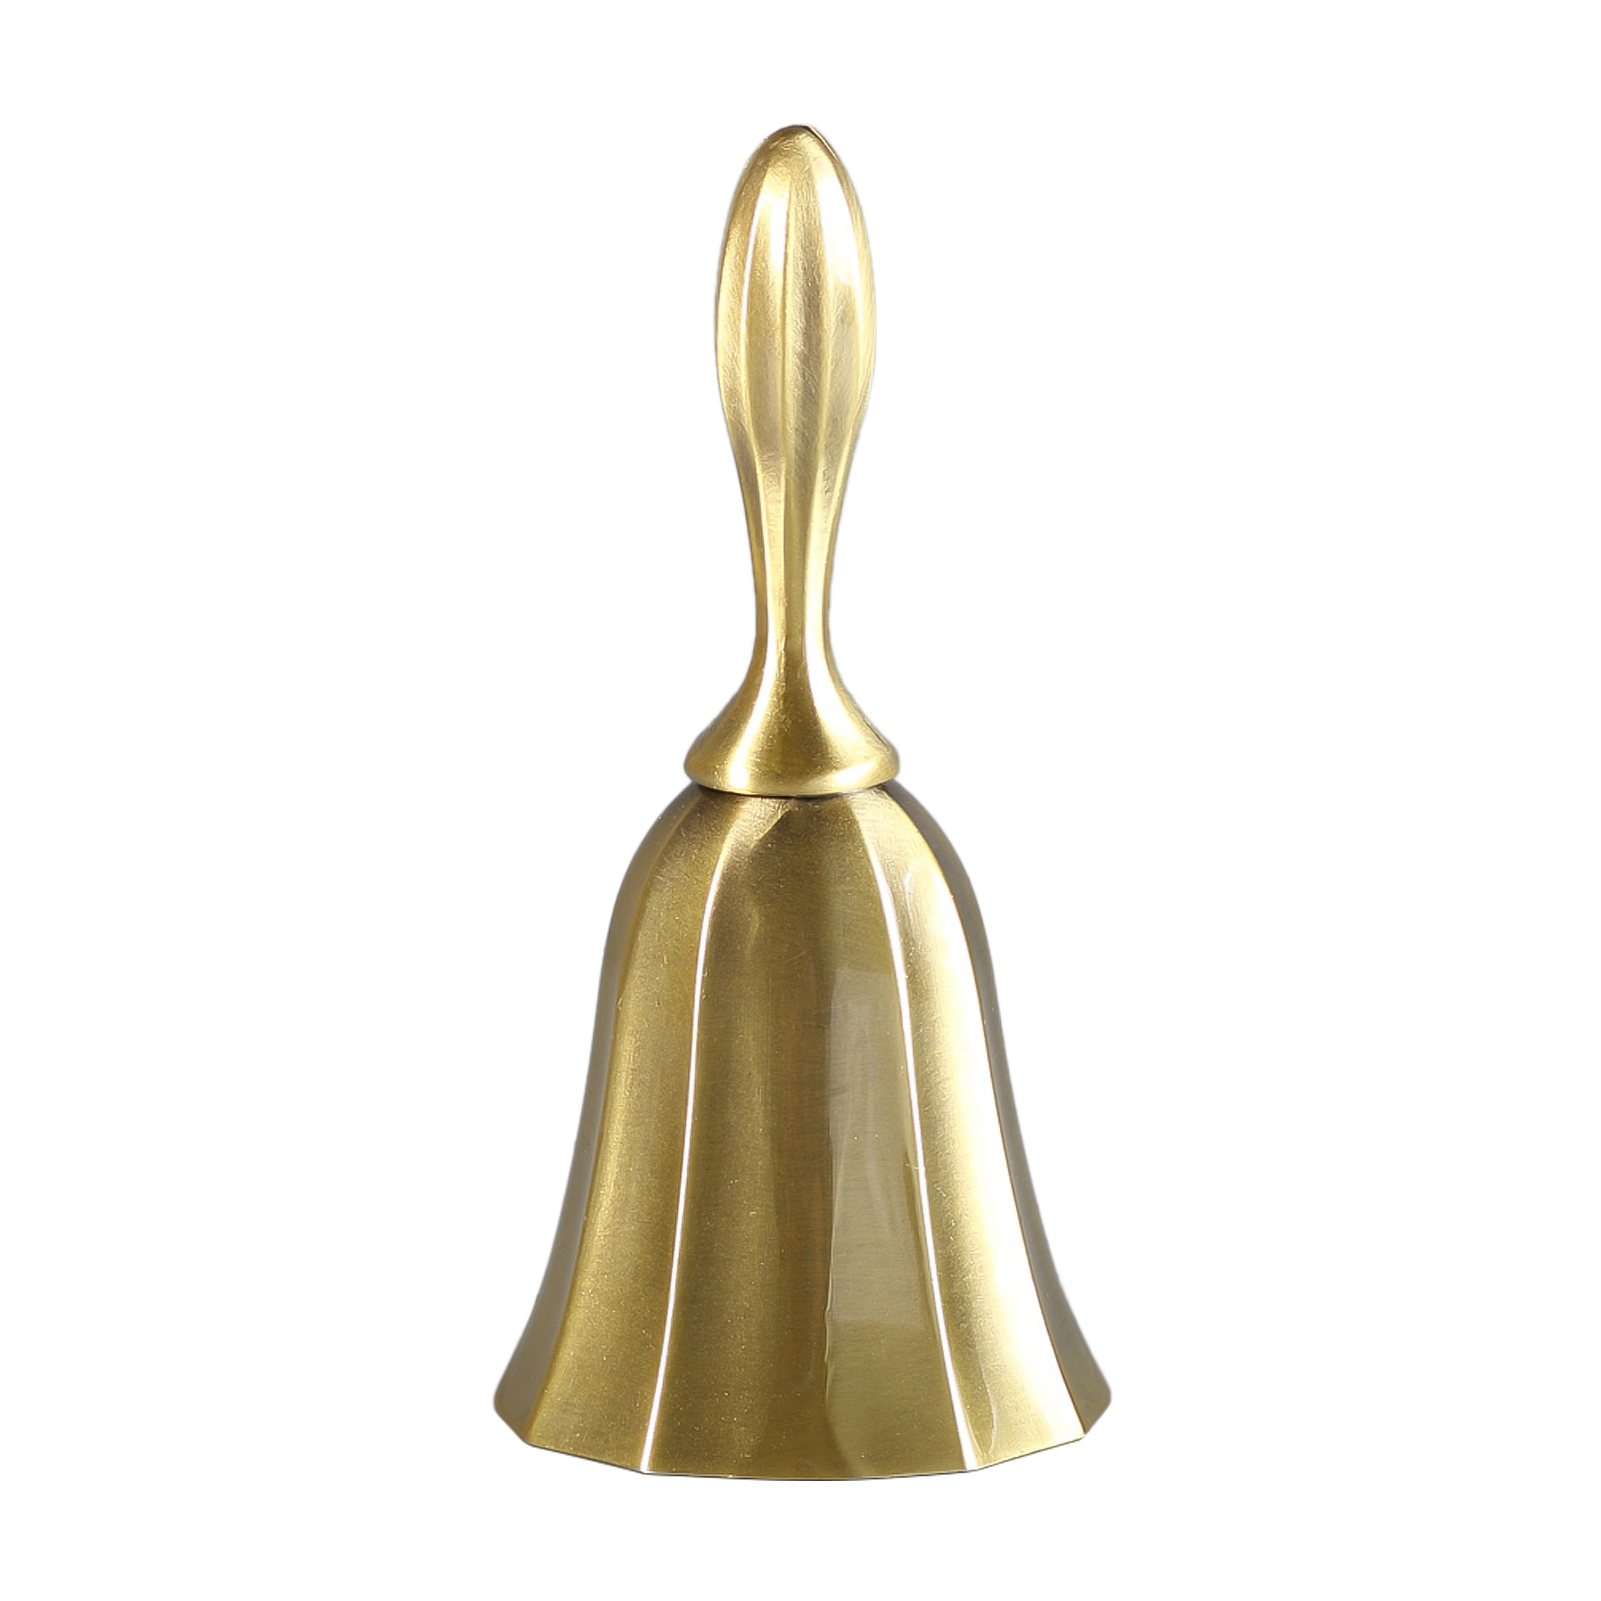 Dcenta Multifunctional Hand Bell Call Bell Musical Instrument for Home School Church Restaurants - image 1 of 7